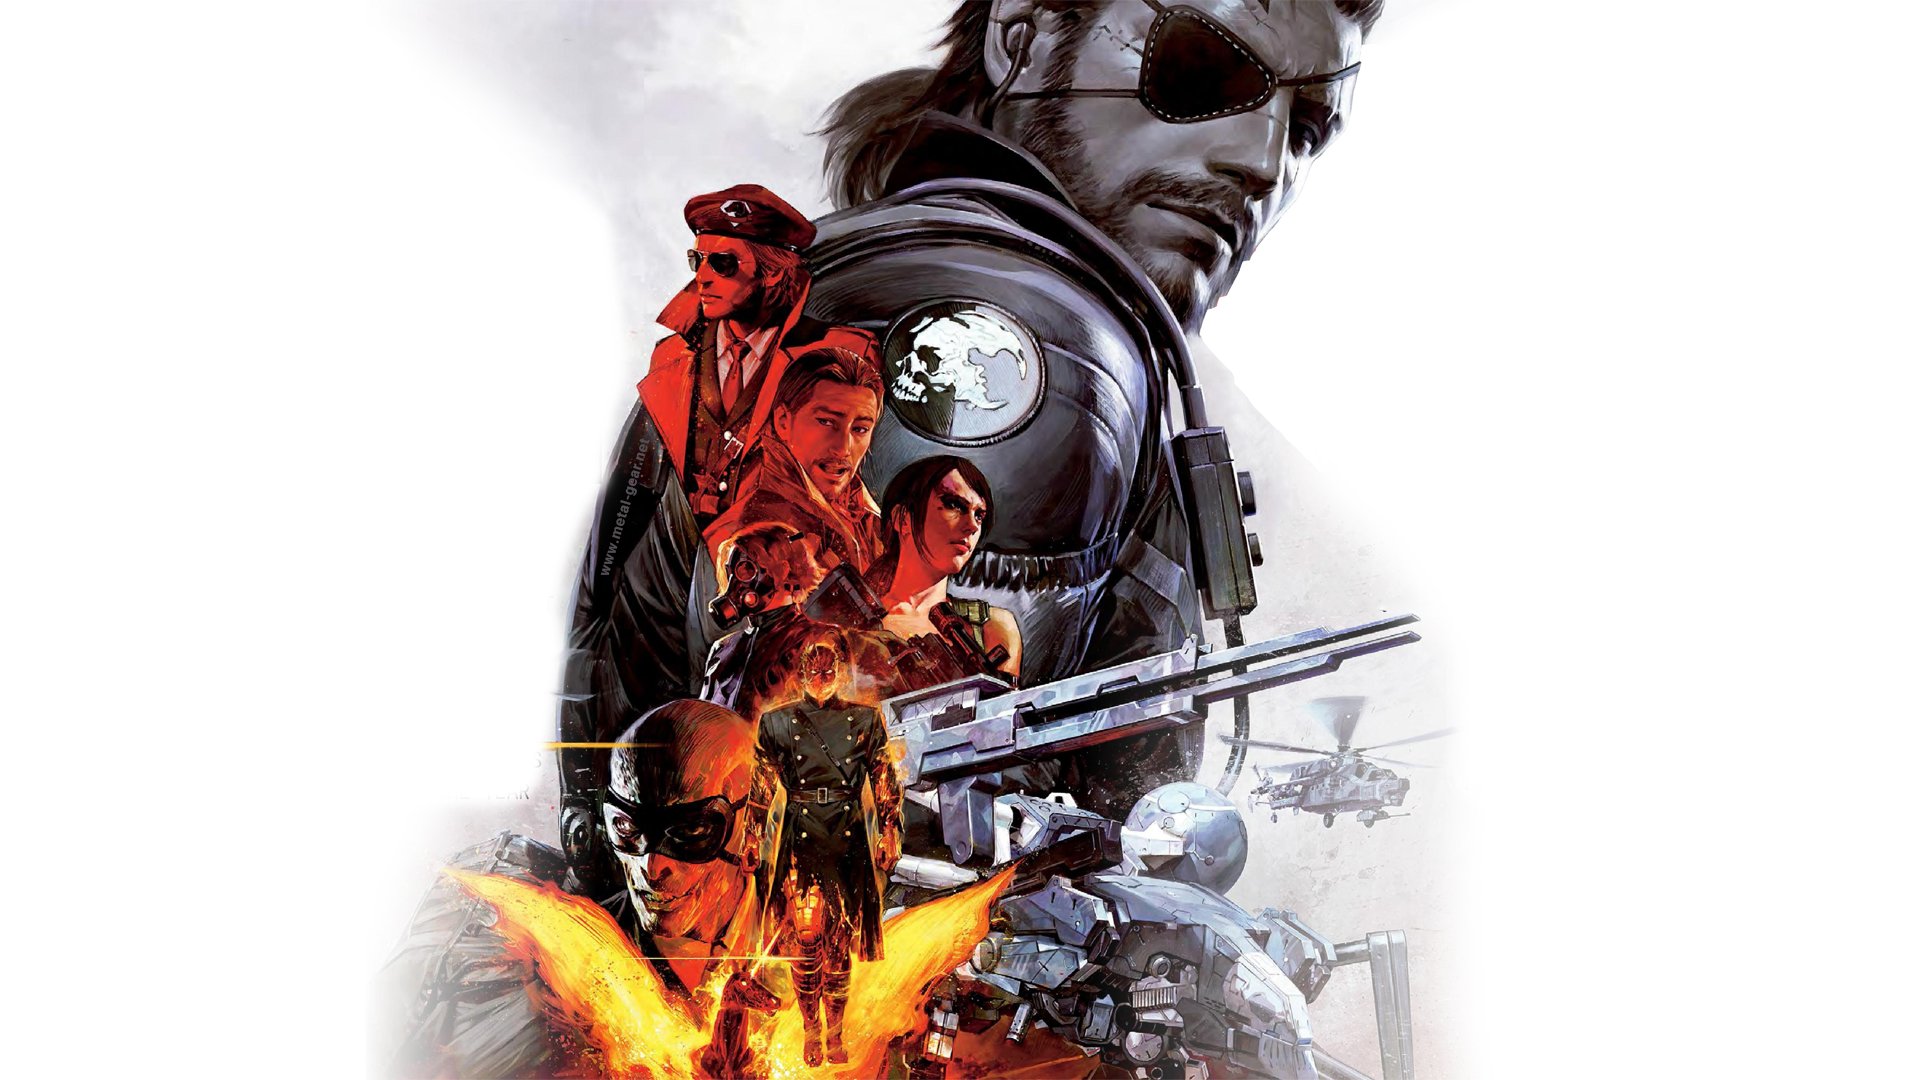 Guide Metal Gear Solid V Buddies and How to Get the Best Out of Them